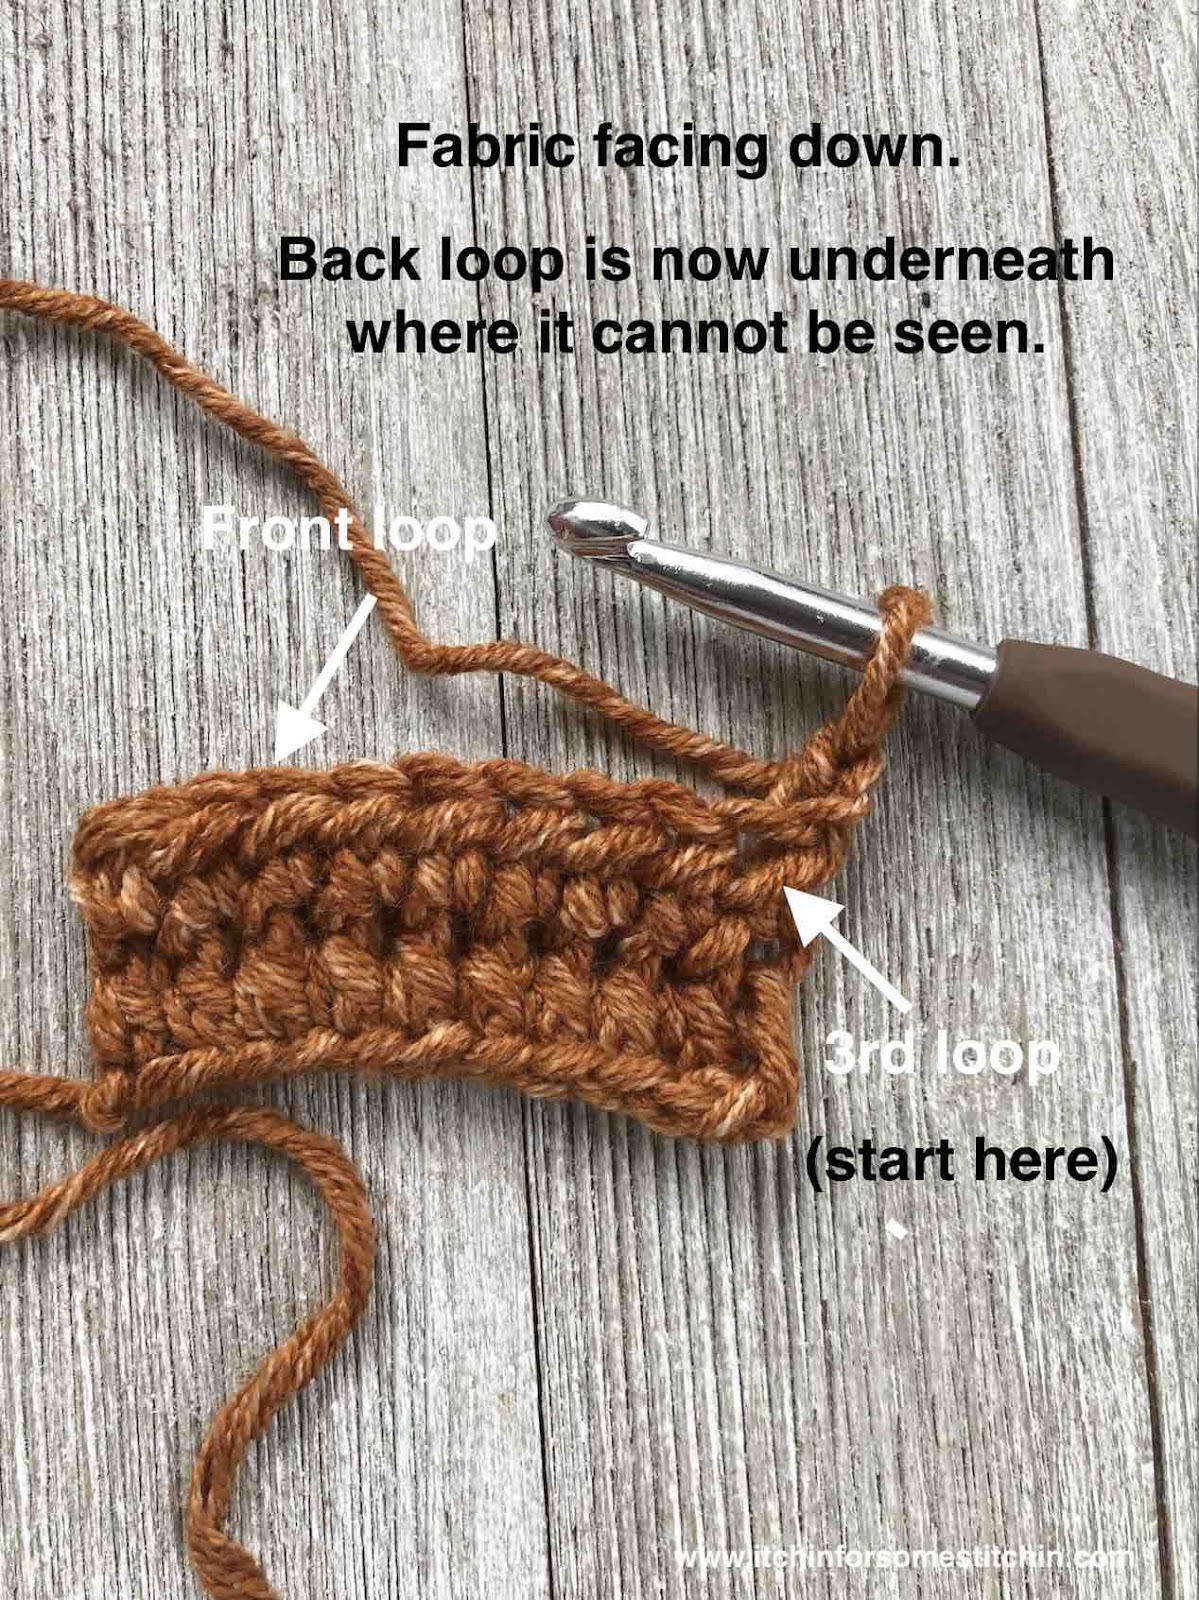 How to Crochet the Knit-look stitch by www.itchinforsomestitchin.co